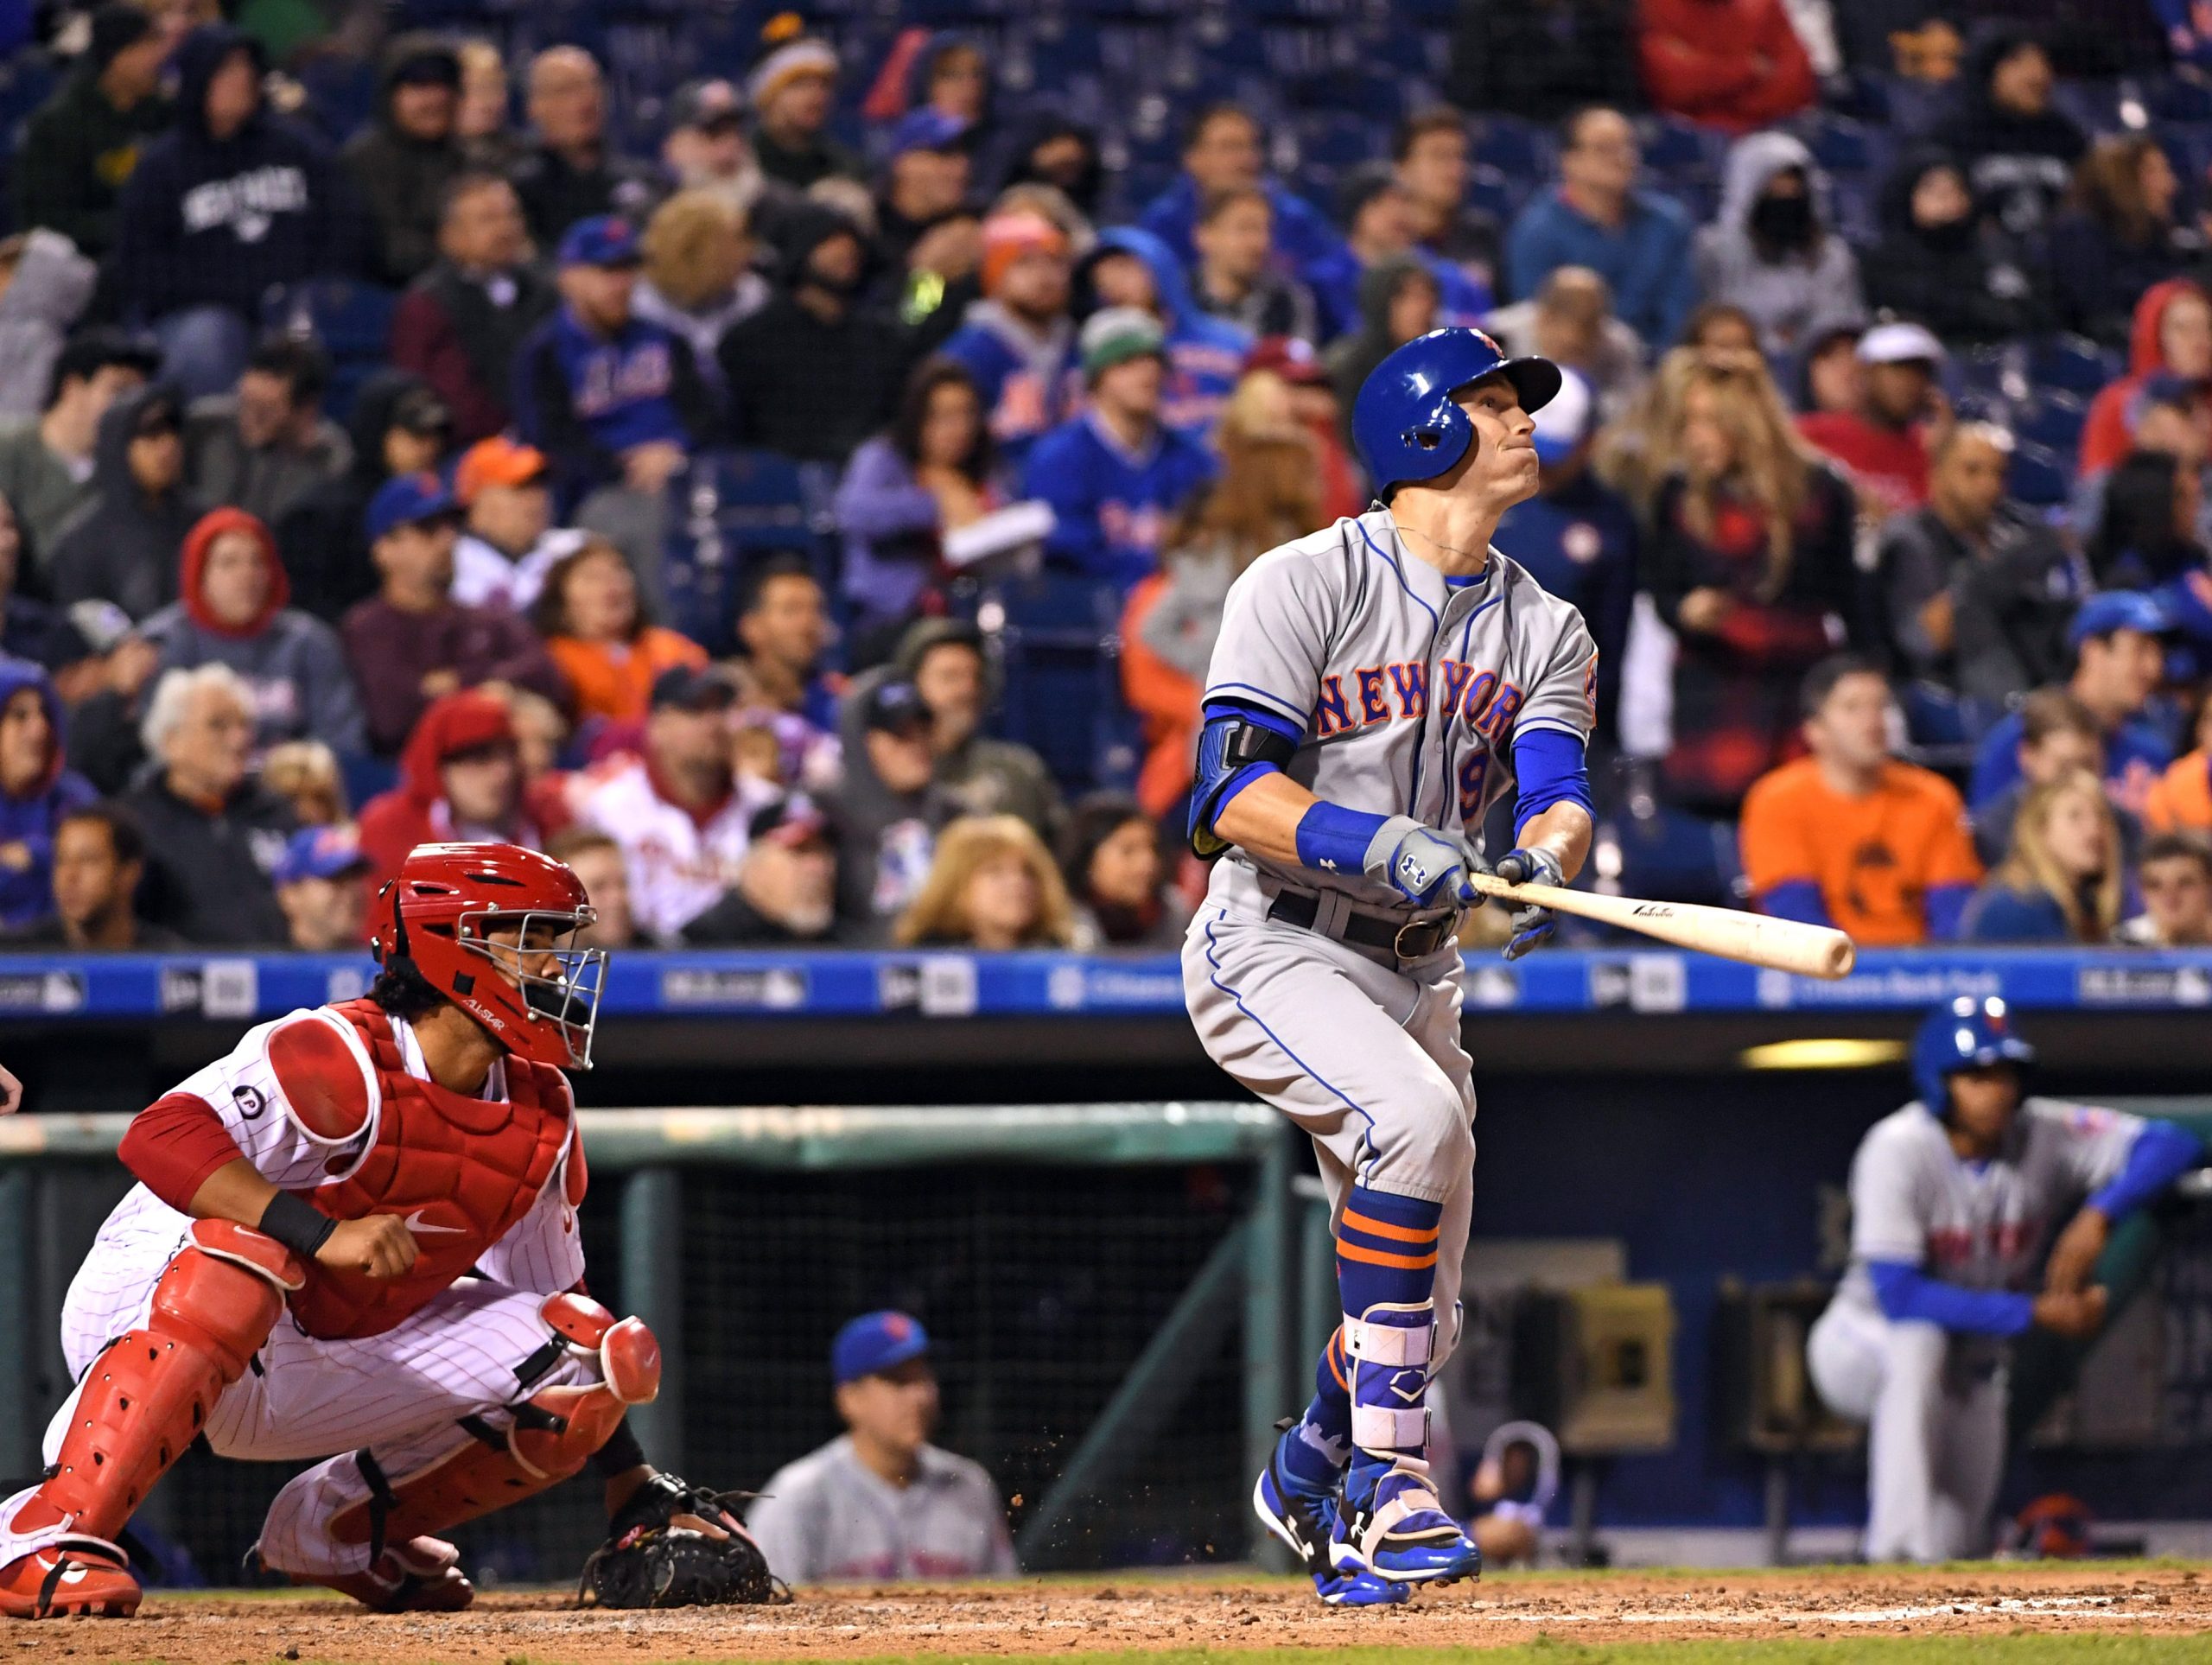 Here's A Look at What The New York Mets' Opening Day Lineup Could Look